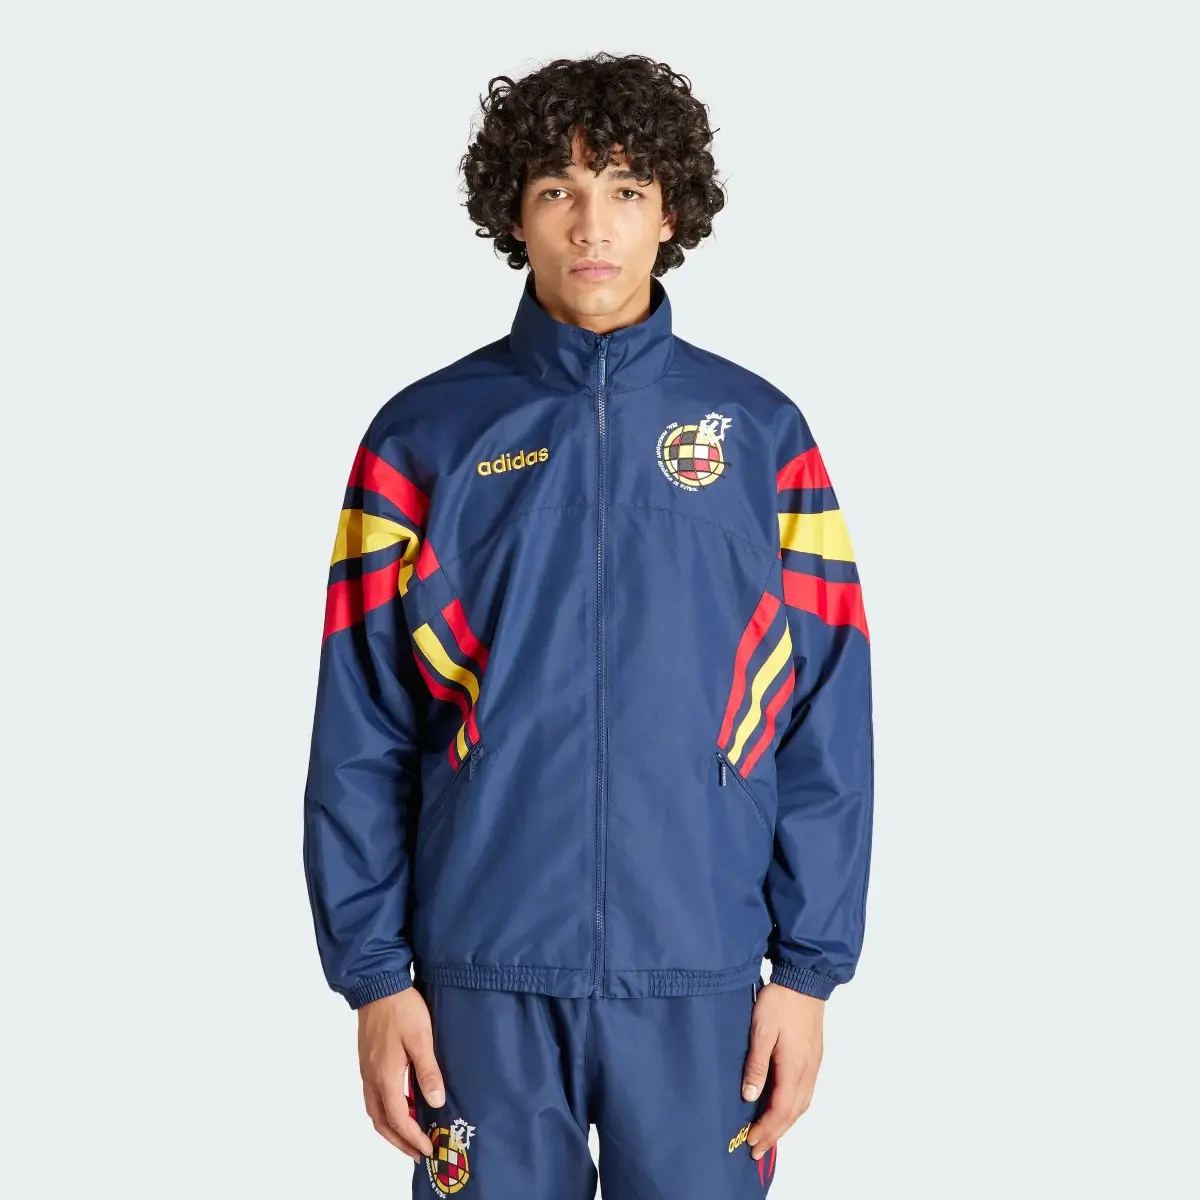 Adidas Spain 1996 Woven Track Top. 2